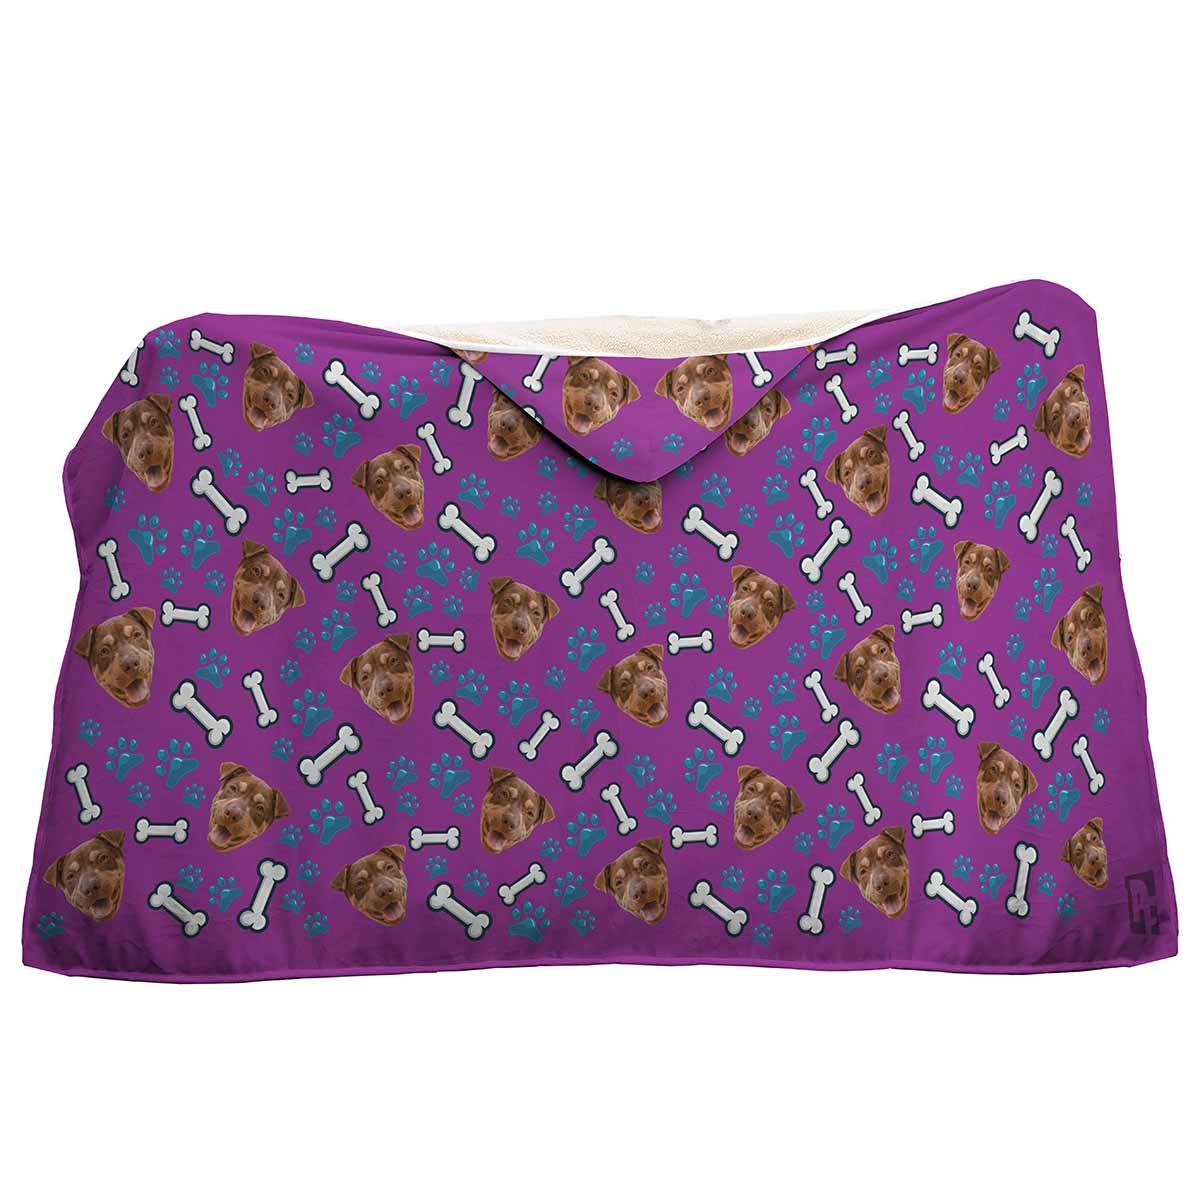 purple Dog hooded blanket personalized with photo of face printed on it